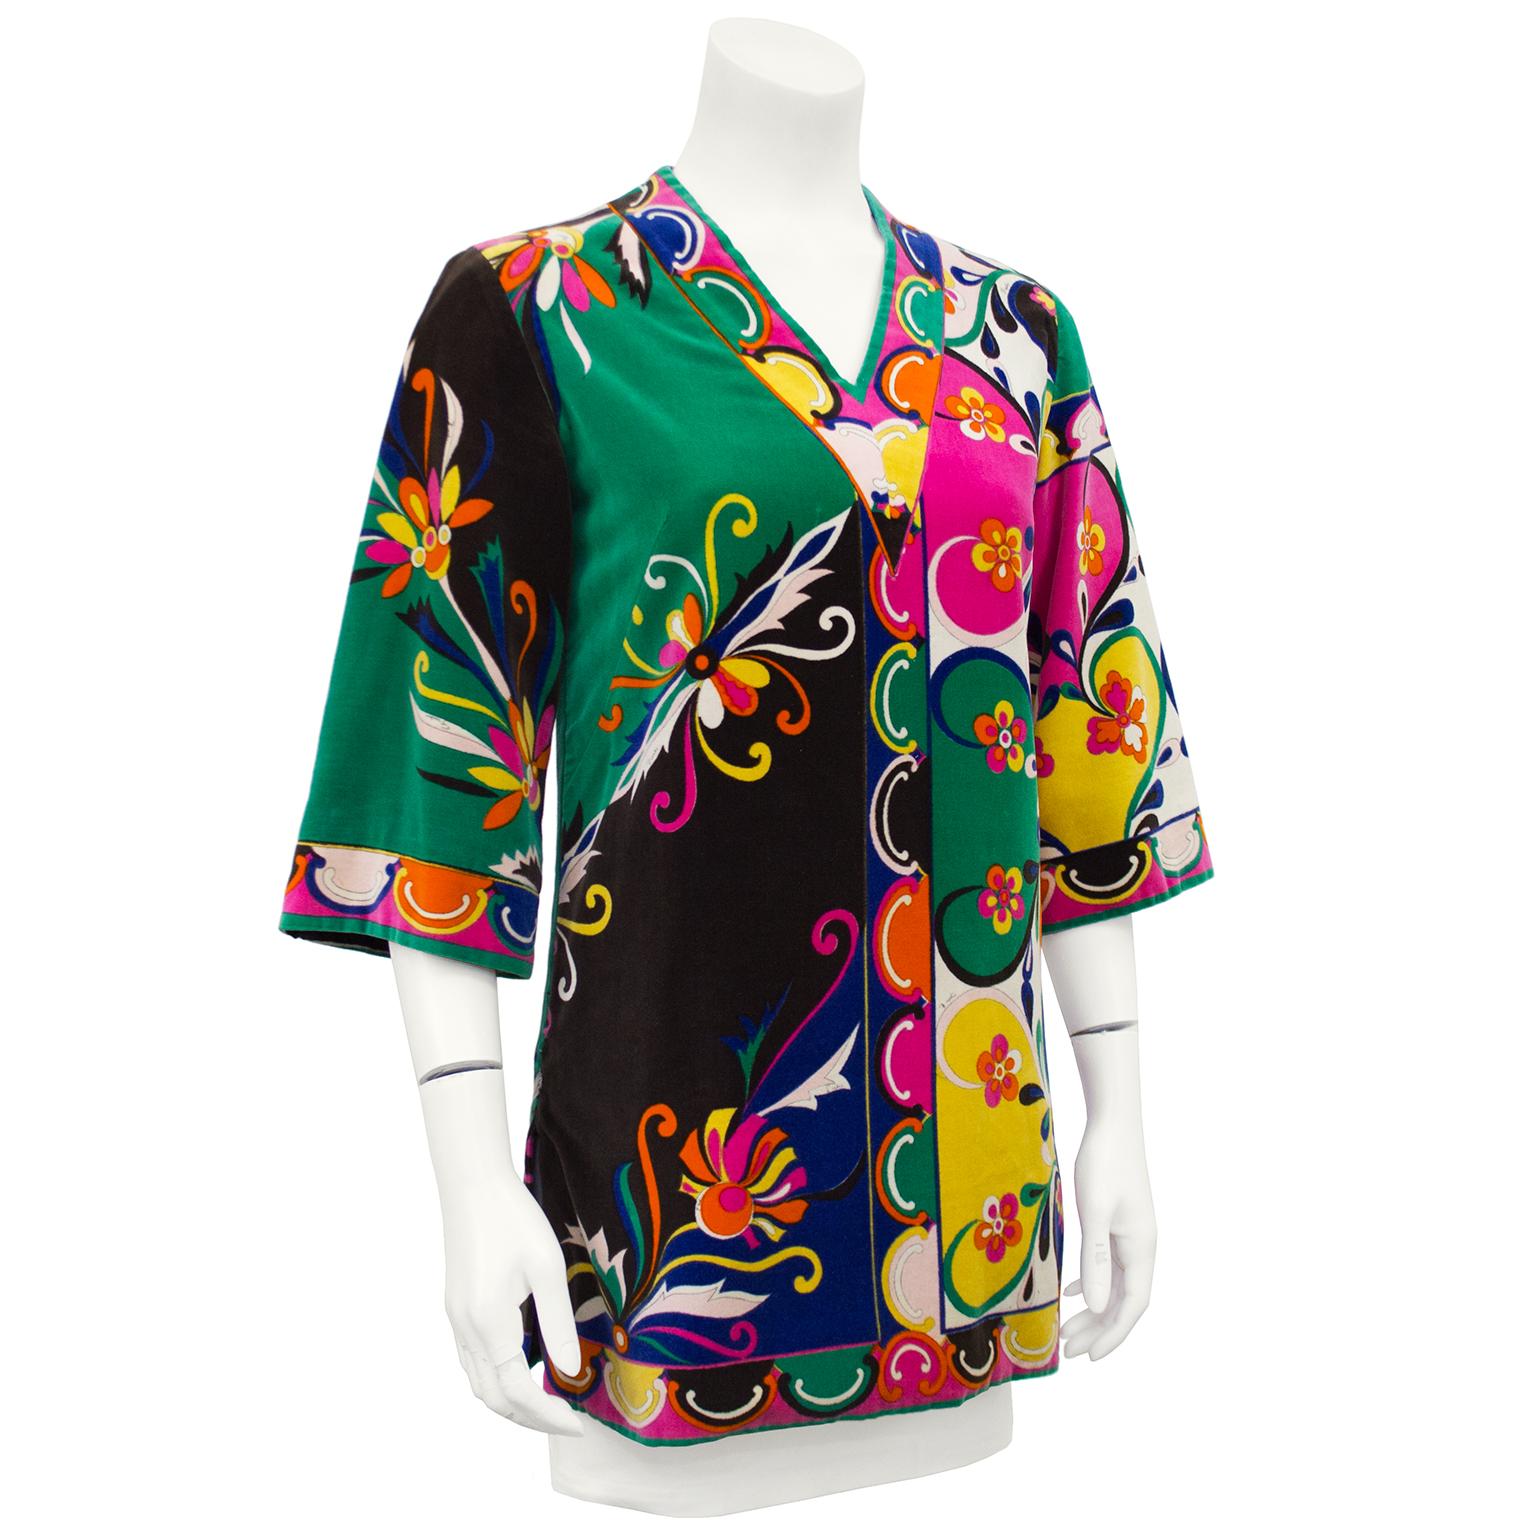 Gorgeously printed Emilio Pucci velvet tunic from the 1970's. The brightly printed top has a V neck, wide elbow length sleeves and a zipper on the side for easy wearing. The bold print is light on one side and dark on the other with a beautiful